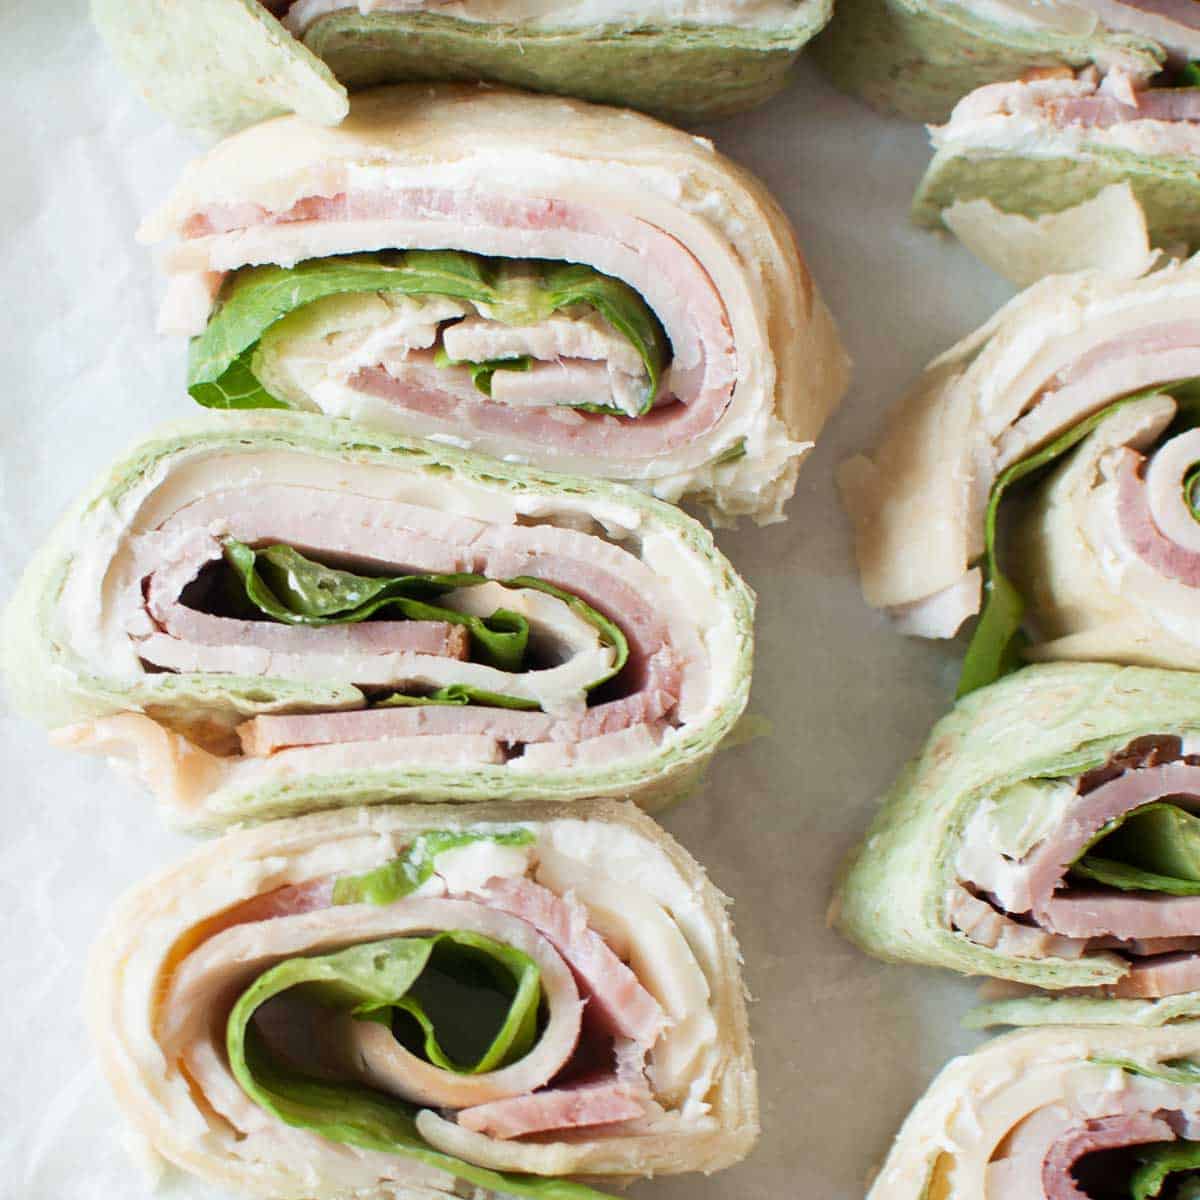 pin wheel sandwiches (sandwiches made from tortillas, lunch meat, cream cheese mixture, and lettuce)